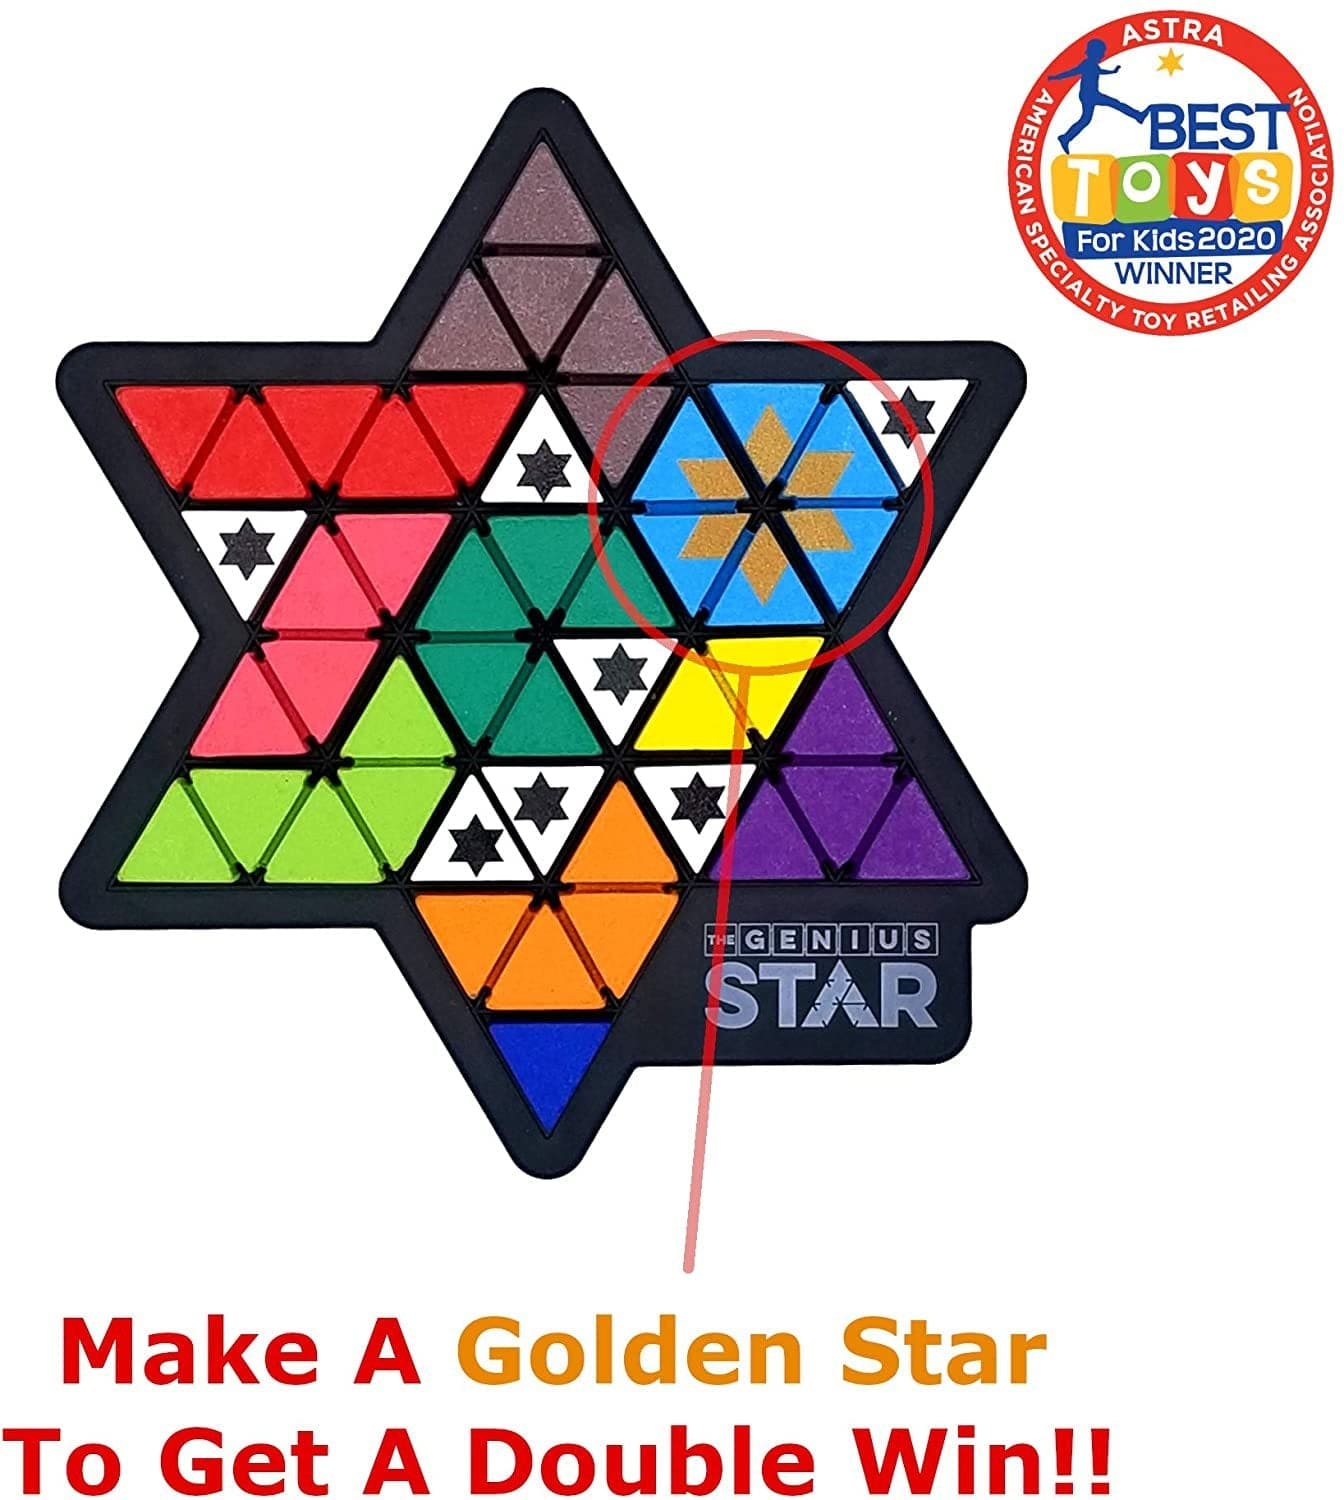 The Genius Star | The Happy Puzzle Company by The Happy Puzzle Company, UK Puzzle